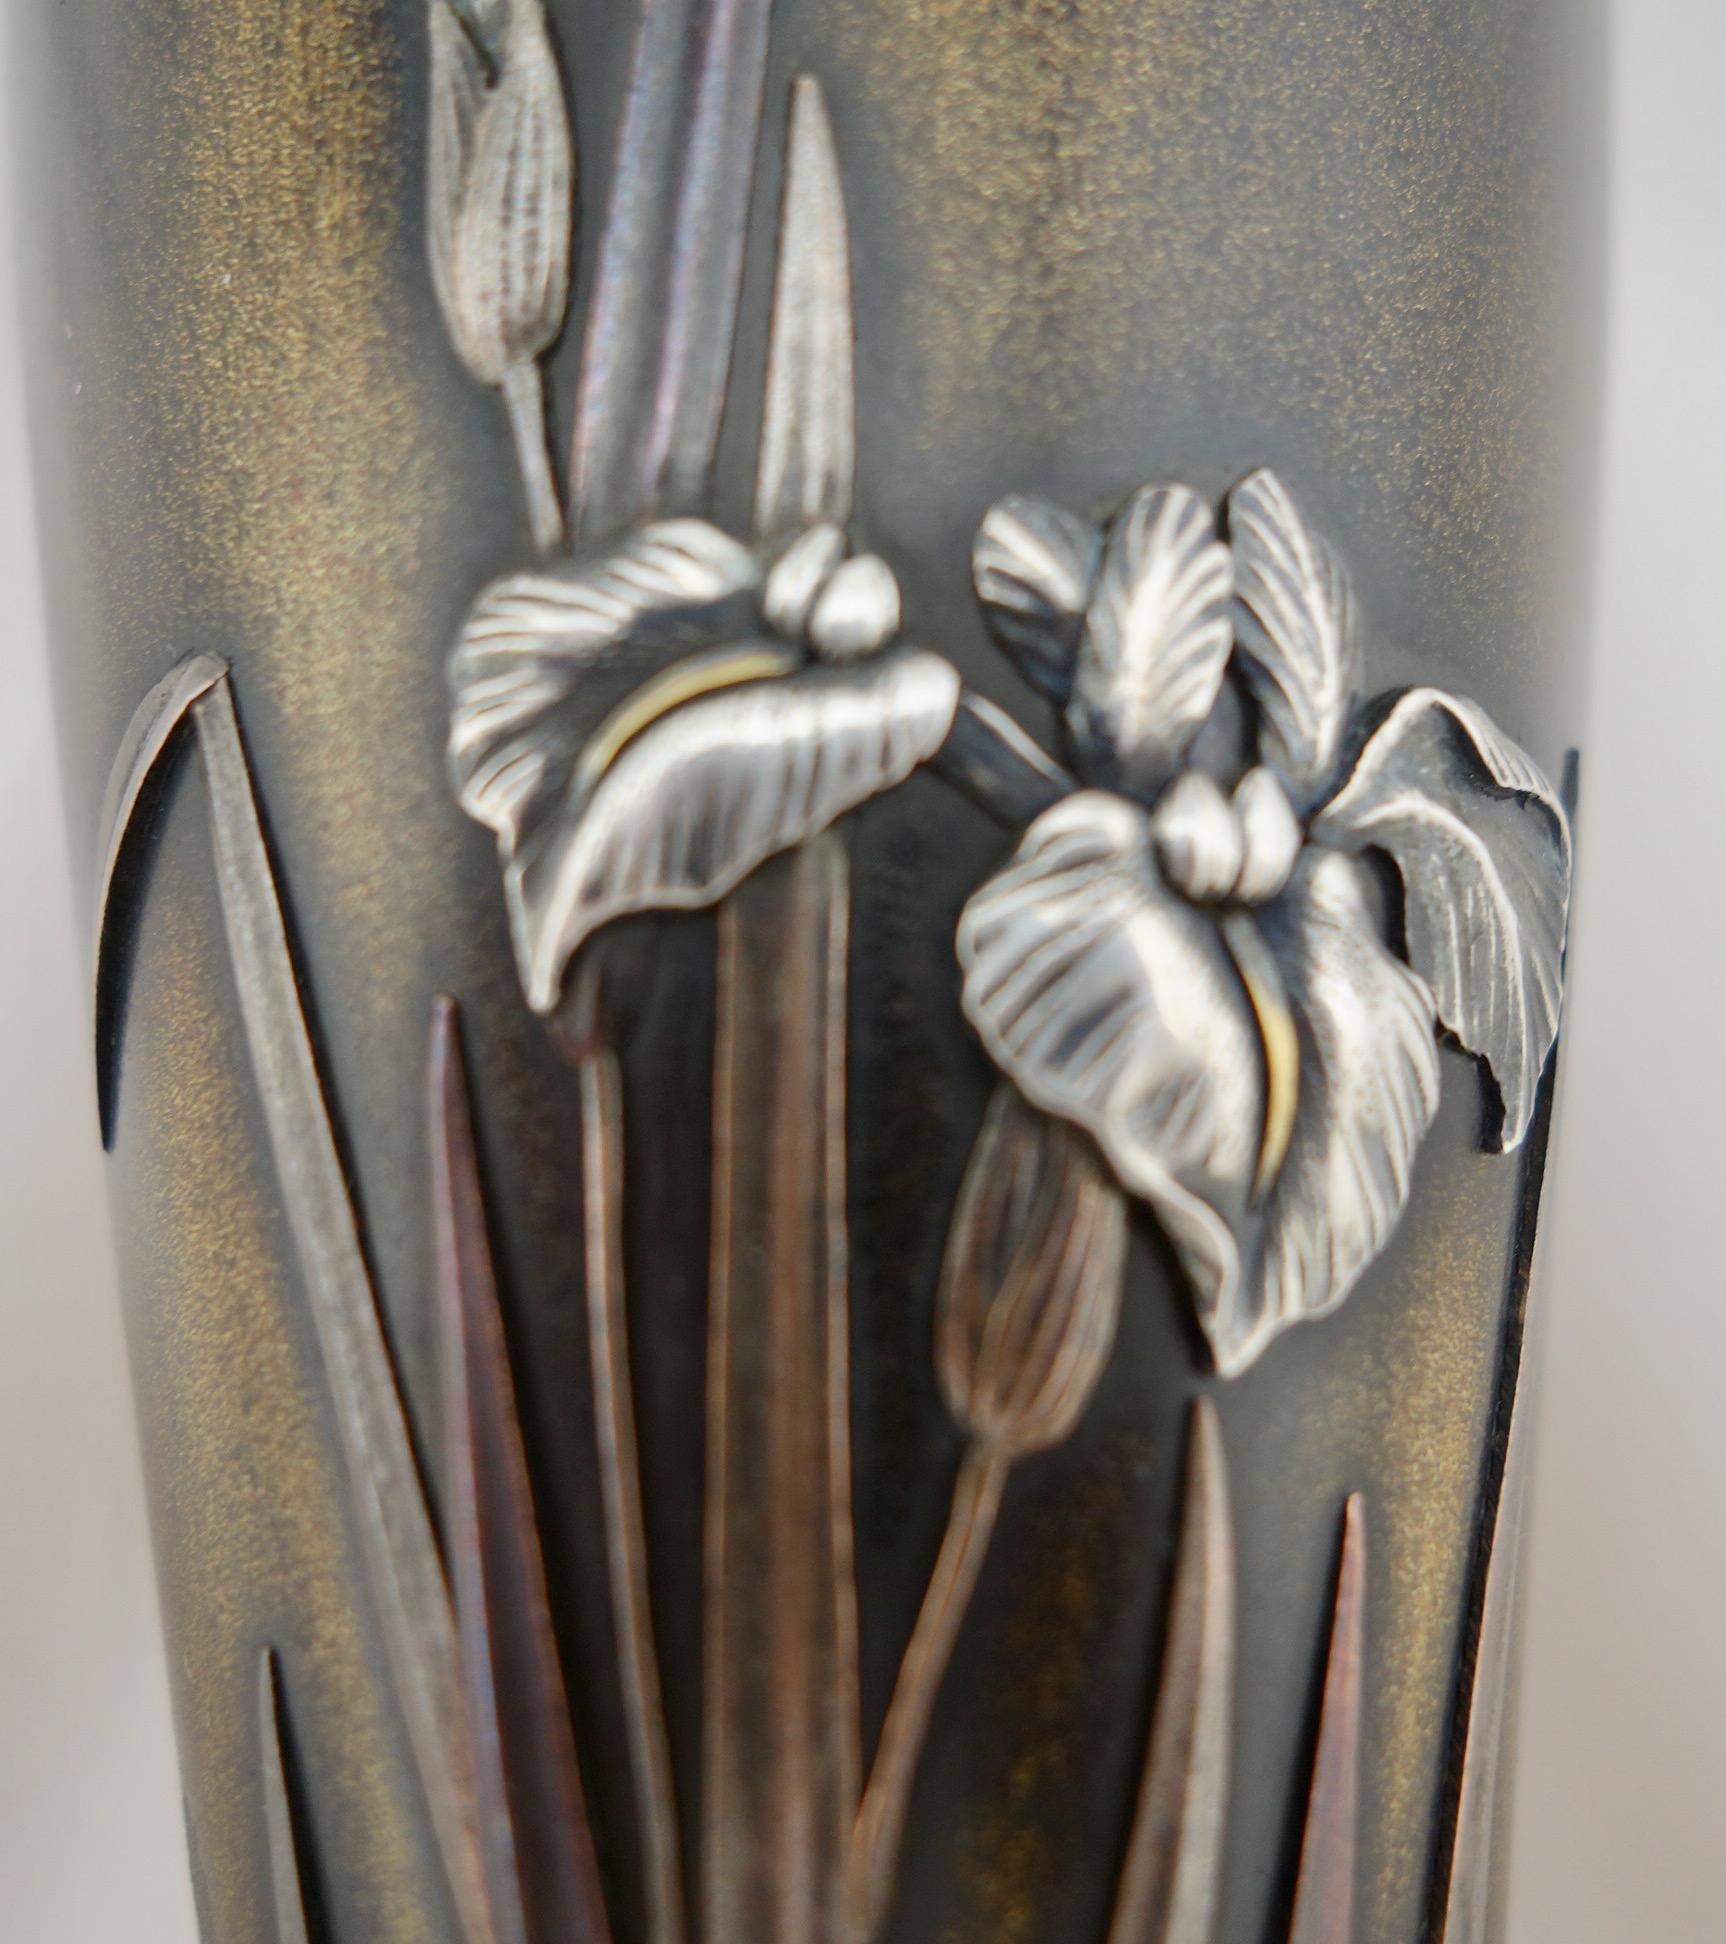 Japanese mixed metal shakudo vase from Meiji Period. The vase depicts silver iris flowers on bronze base. Signed on the side by the maker, and marked on the bottom for Nogawa workshop. The vase shows slight loss of patination around the flowers. It